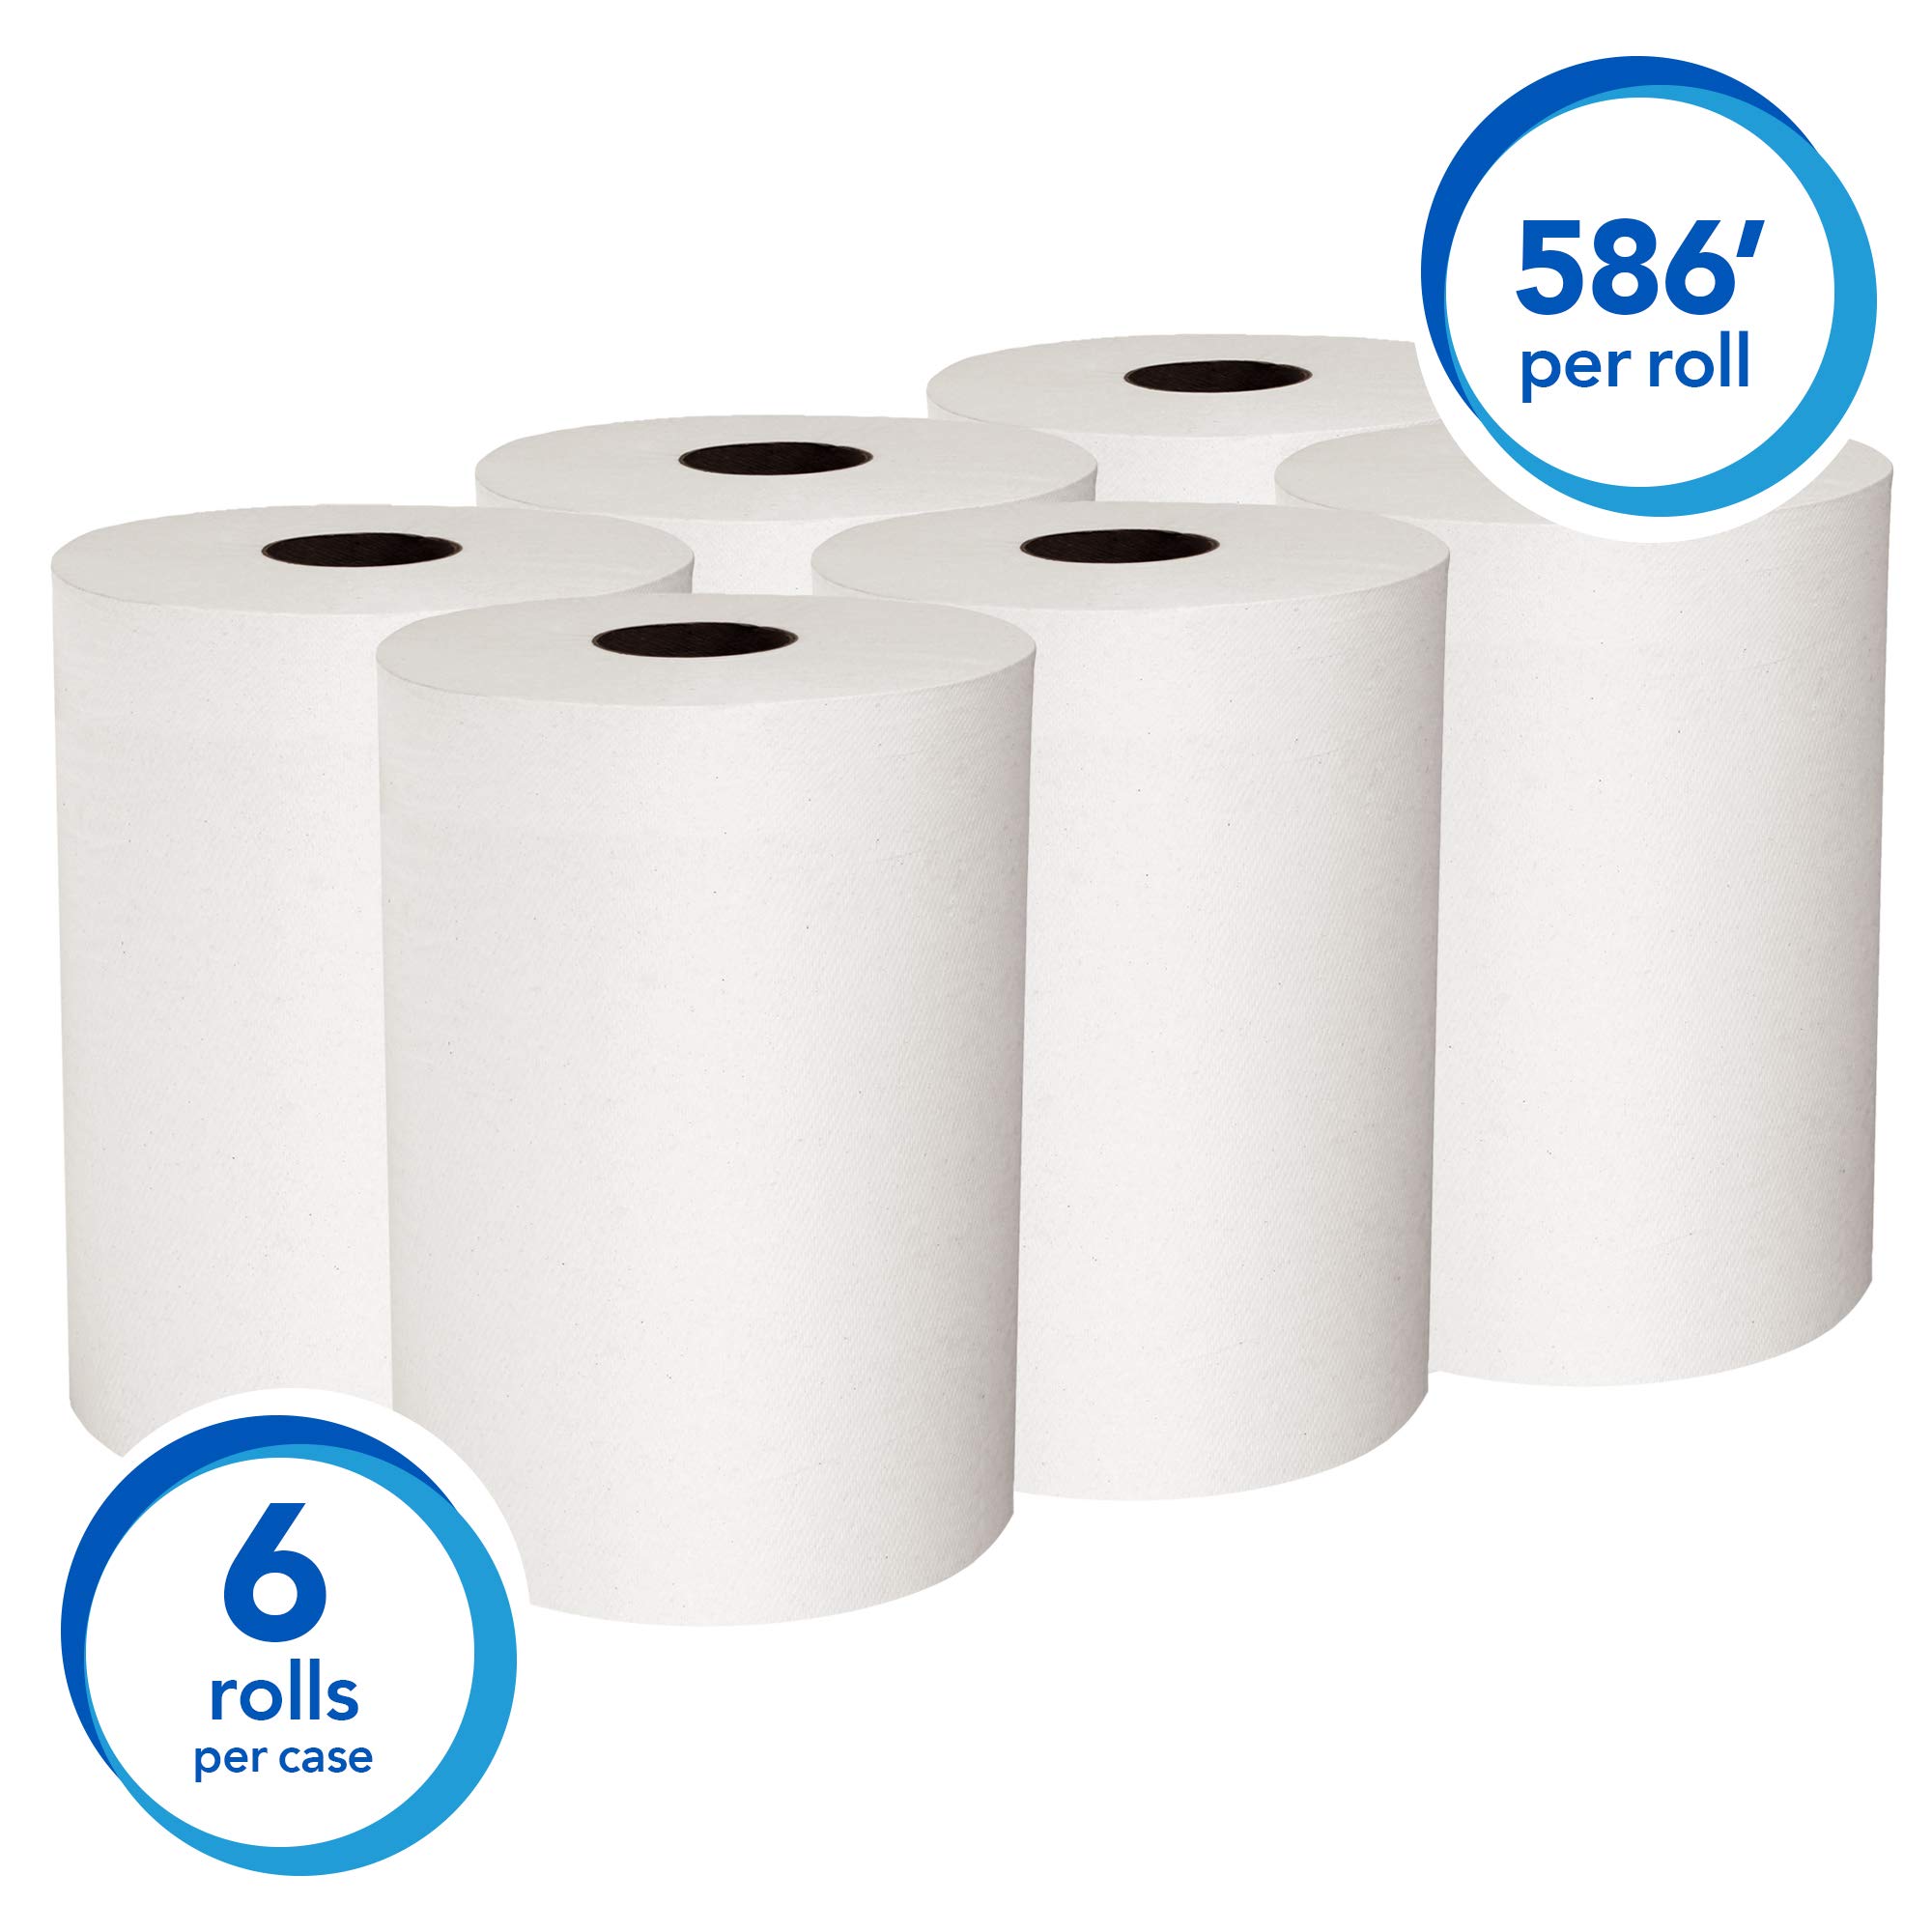 Scott Control Slimroll Hard Roll Paper Towels (12388) with Fast-Drying Absorbency Pockets, White, 6 Rolls / Case, 580' / Roll